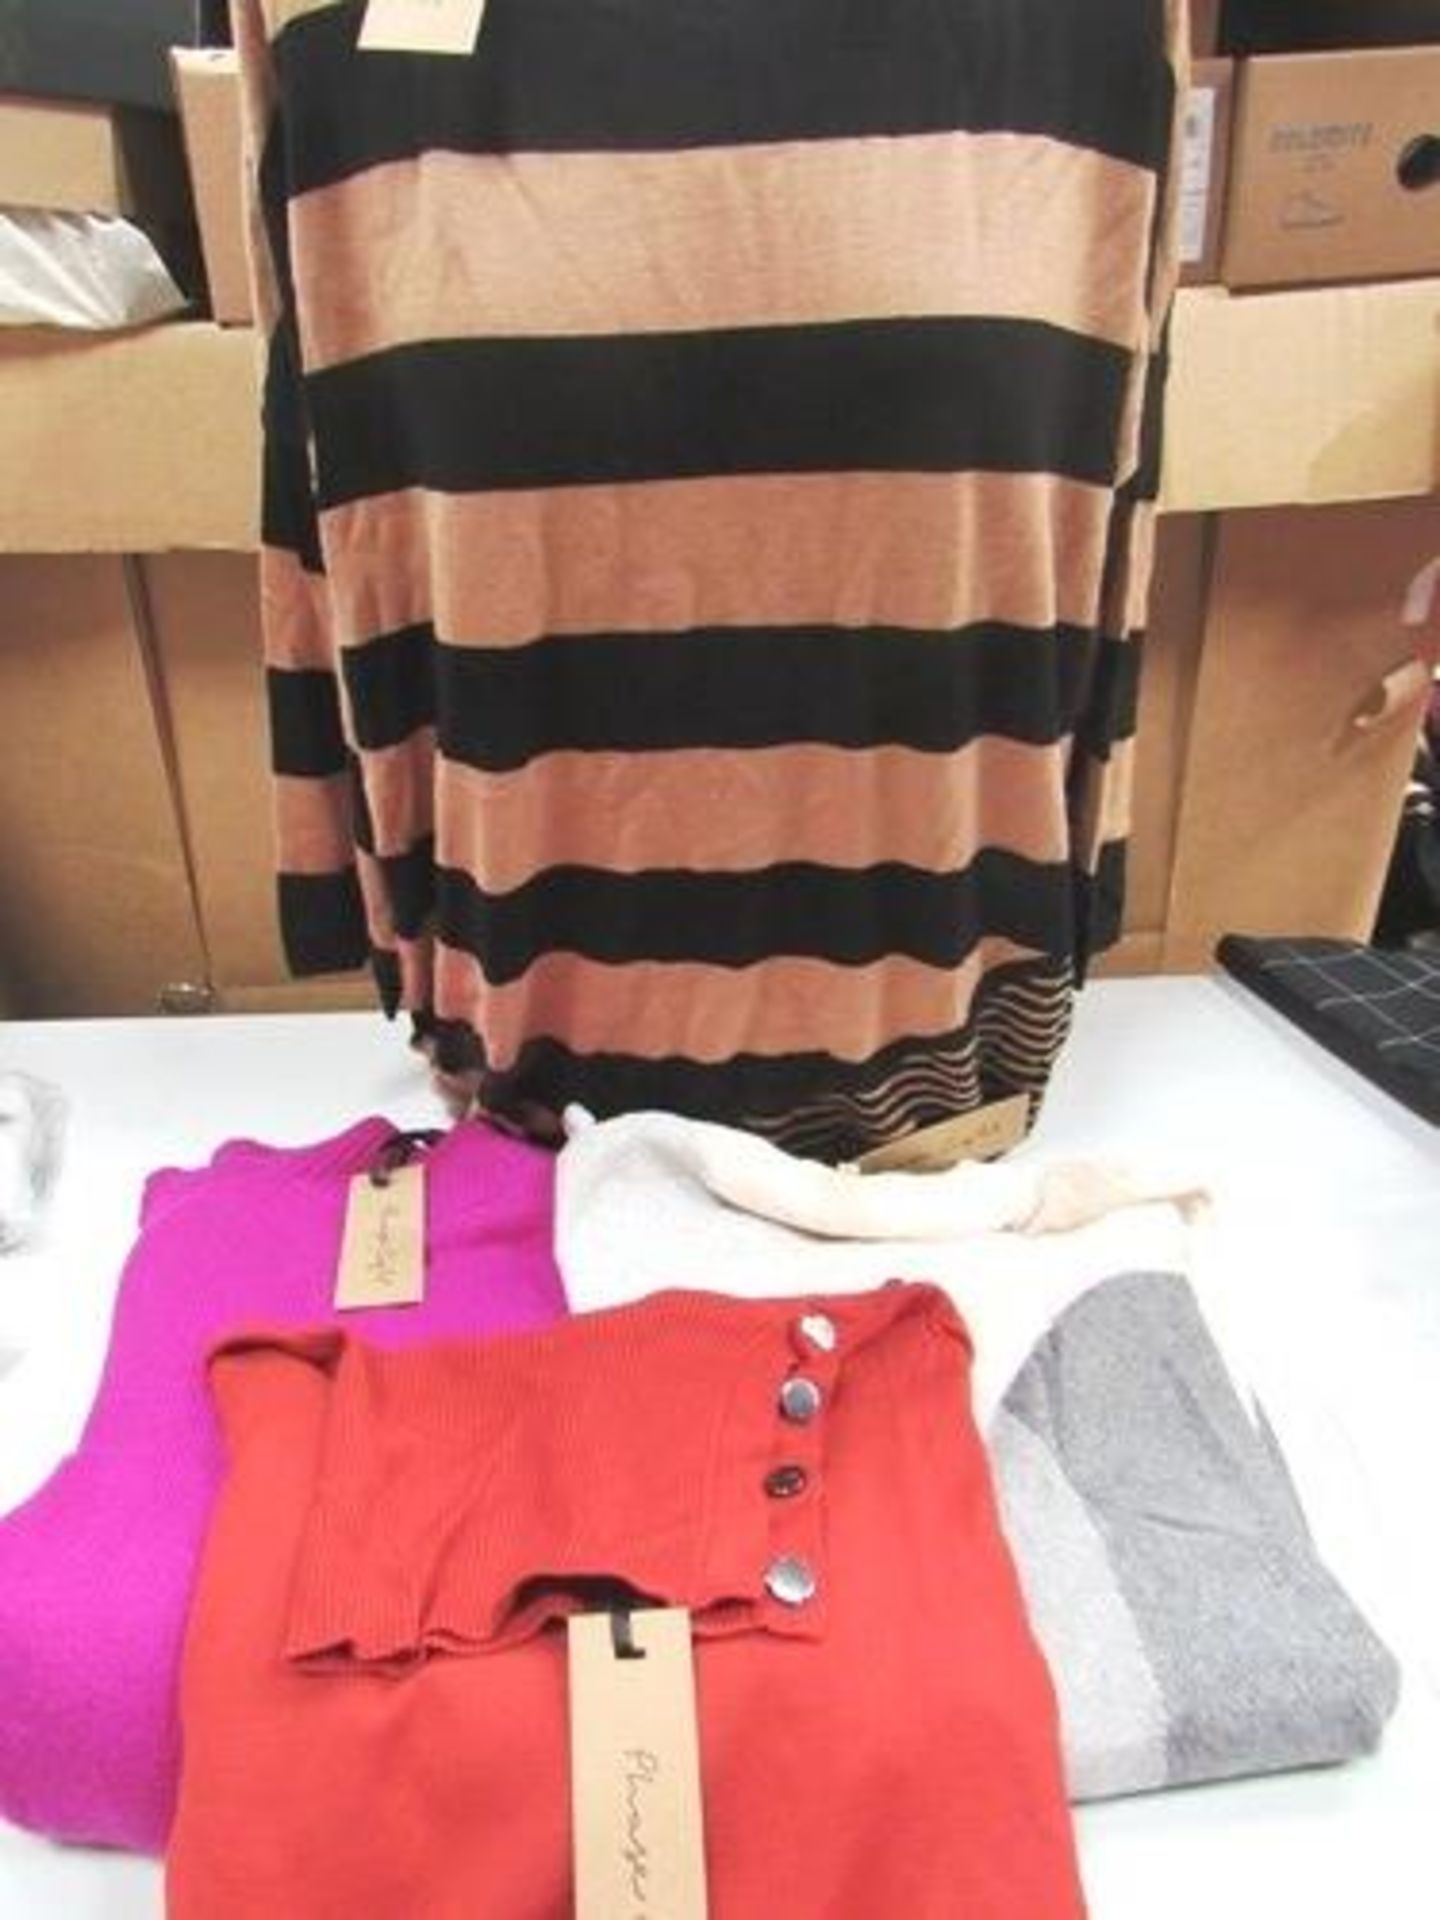 4 x items of Phase Eight ladies knitwear, assorted sizes - New with tags (1B)